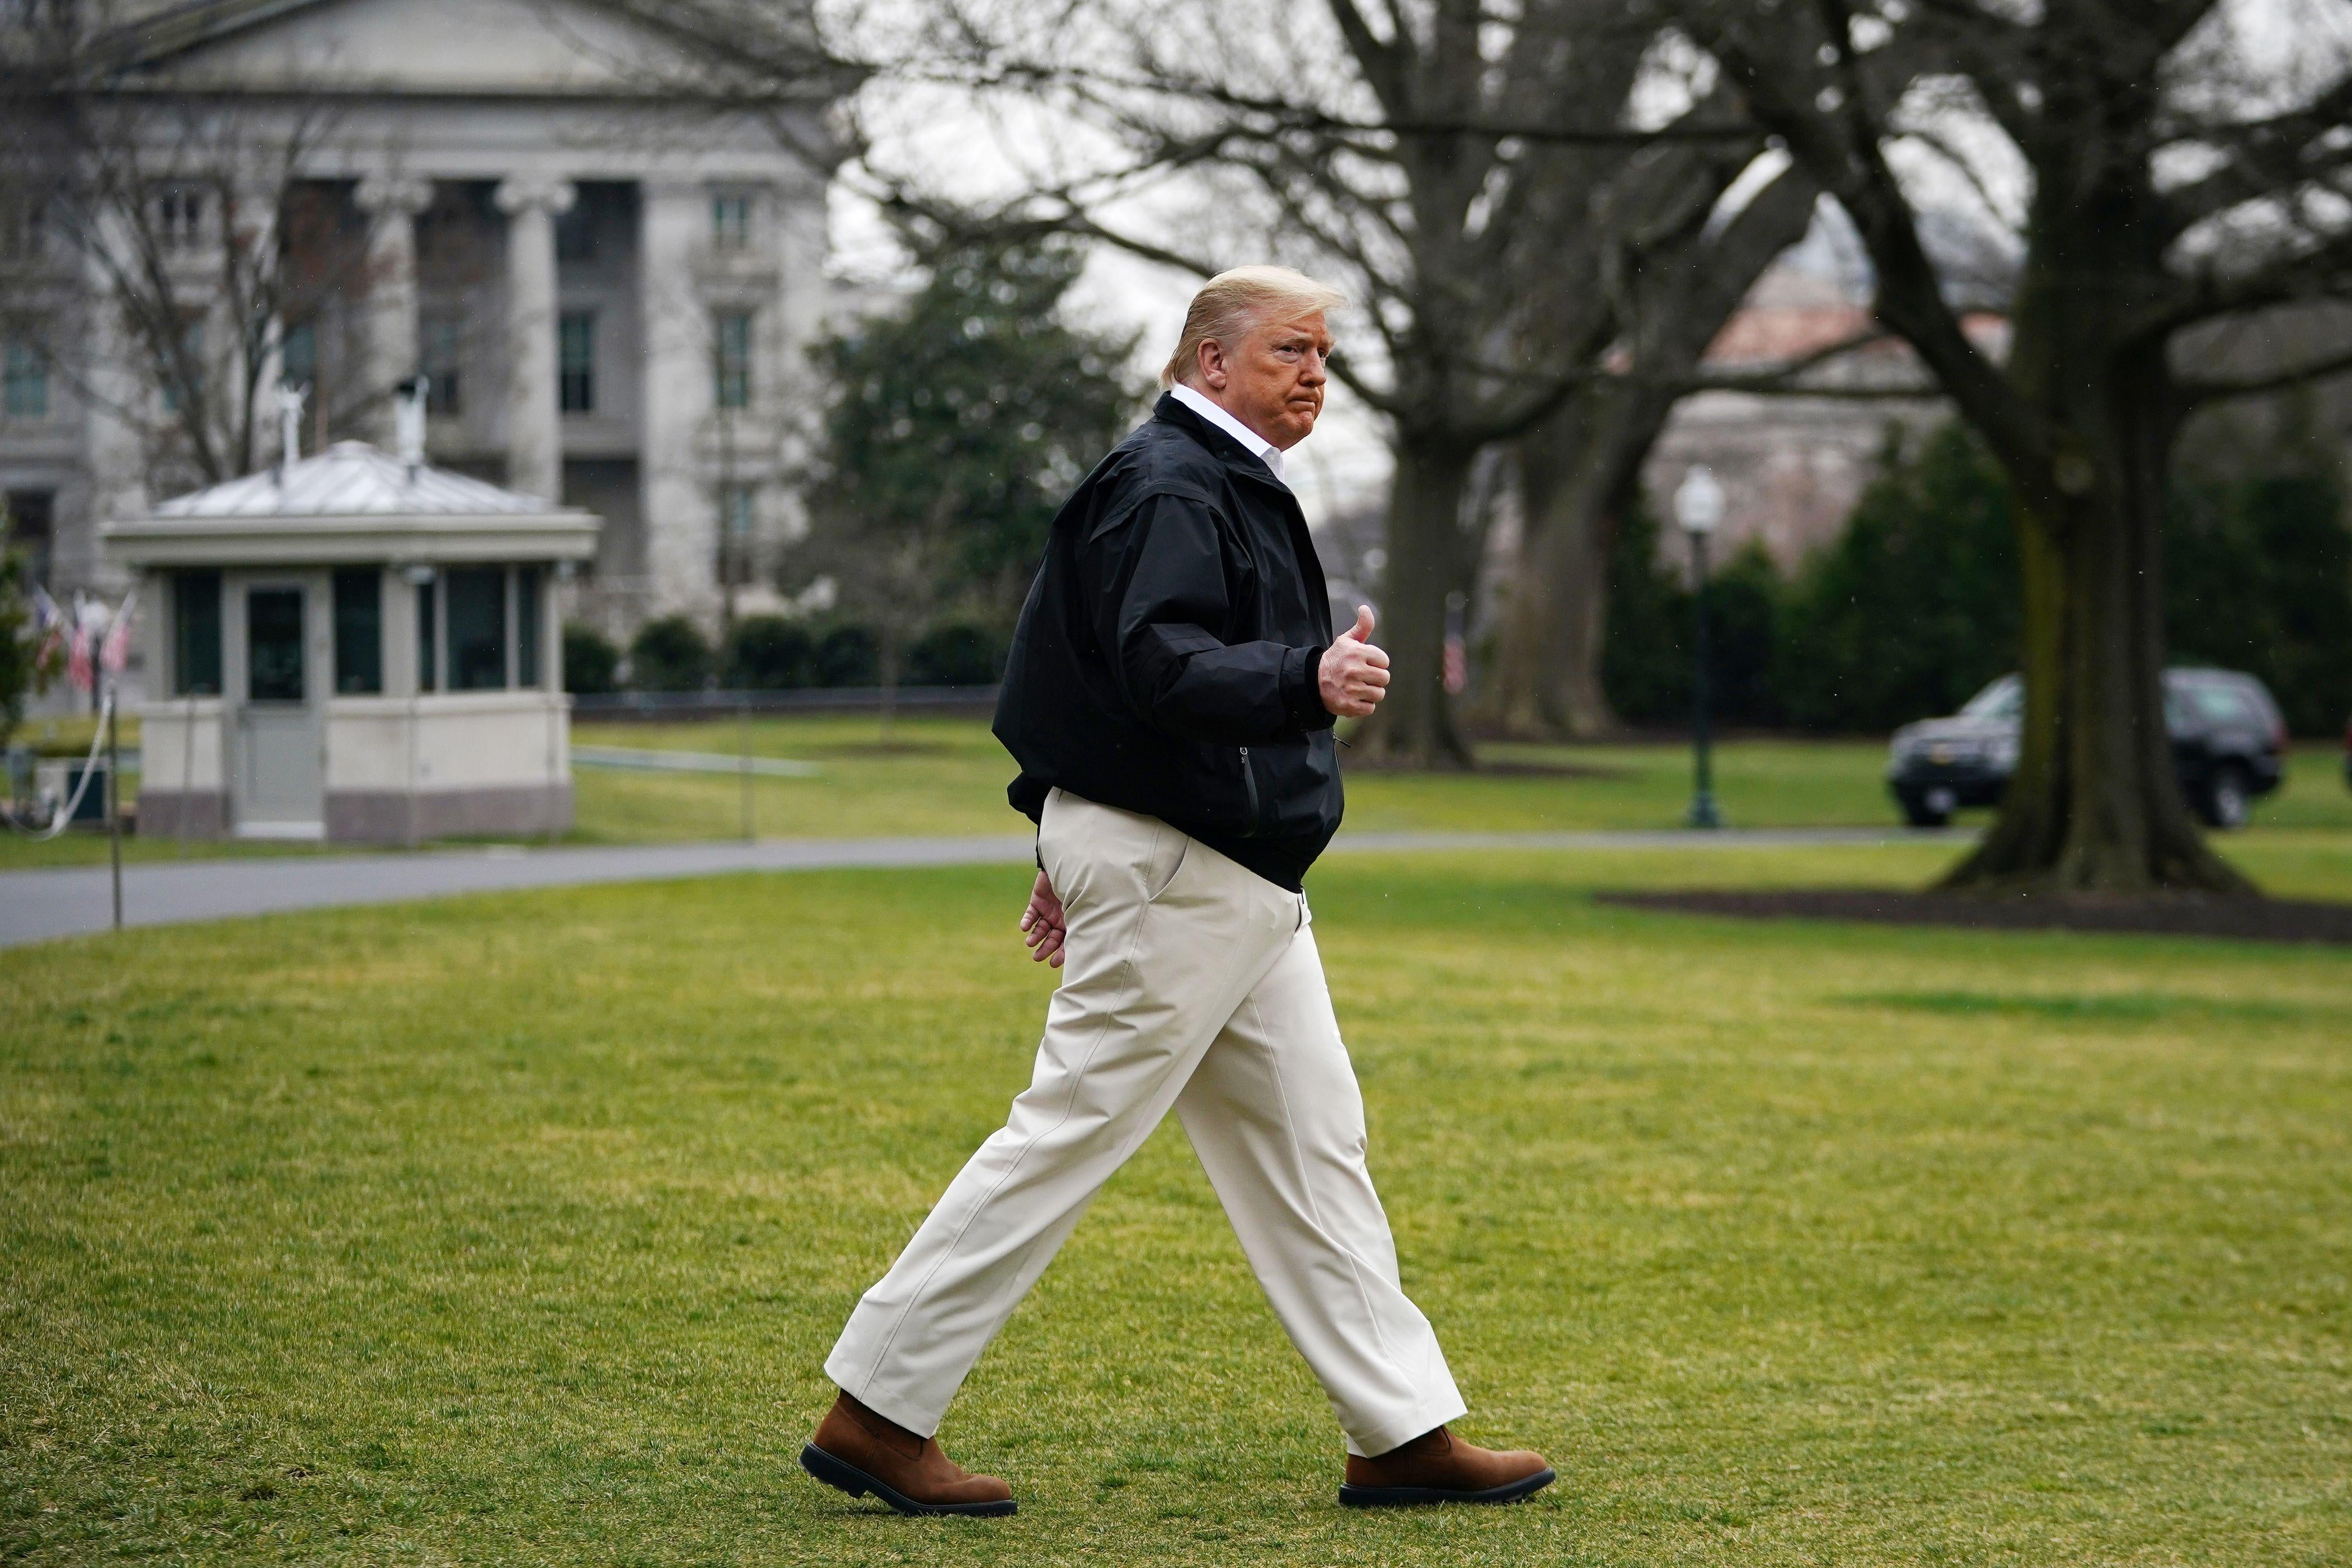 Trump makes a thumbs-up as he walks across the South Lawn